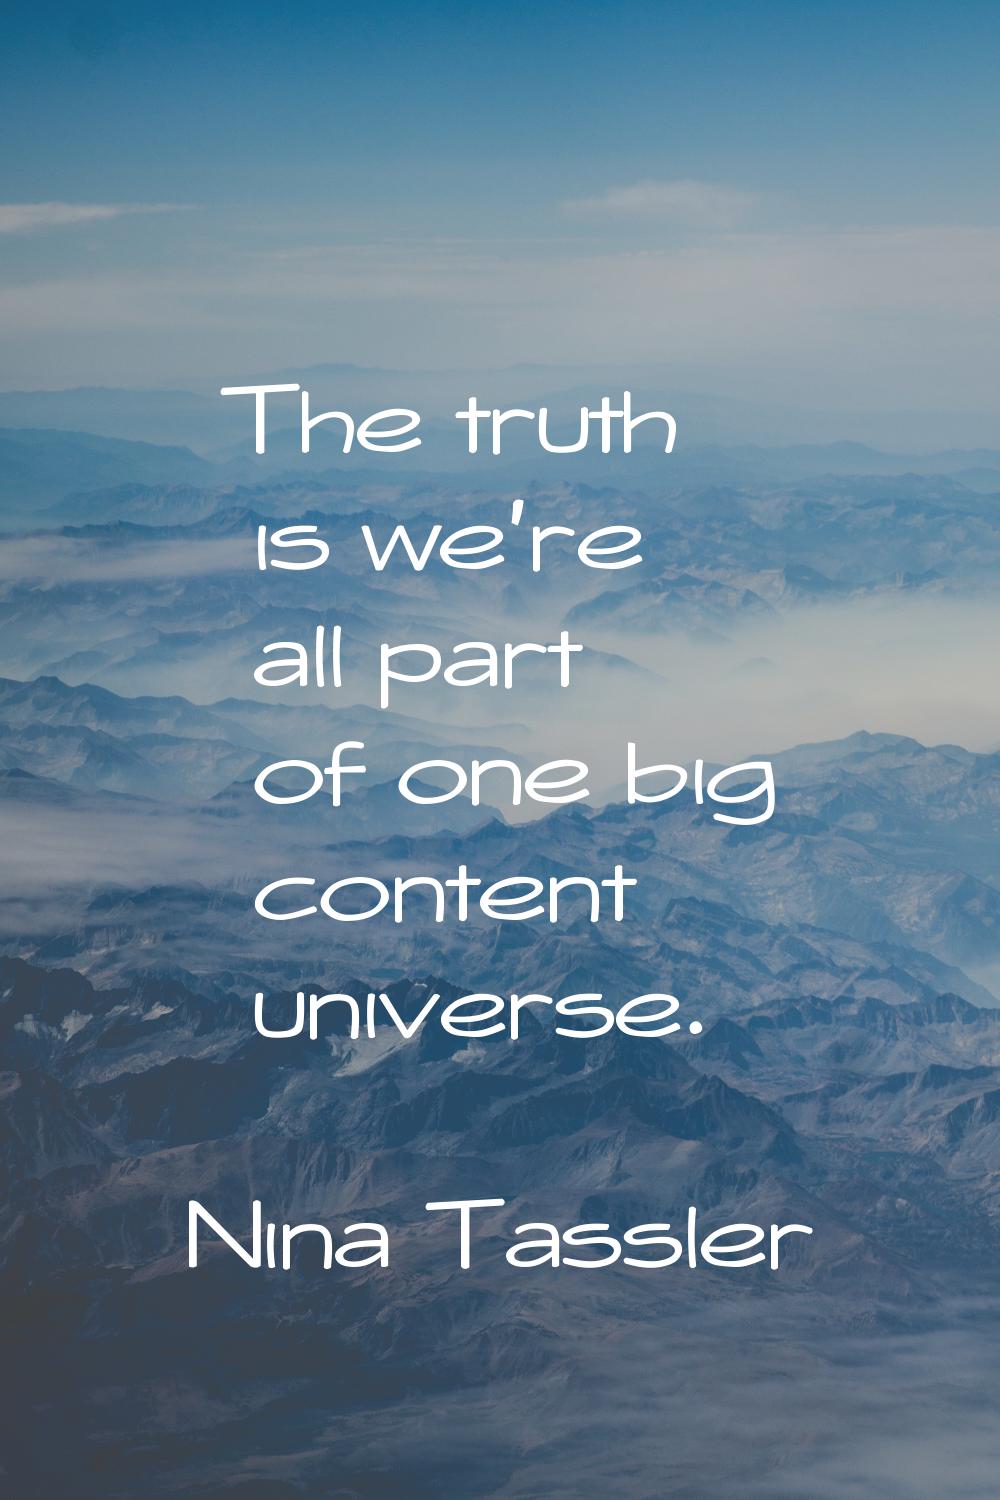 The truth is we're all part of one big content universe.